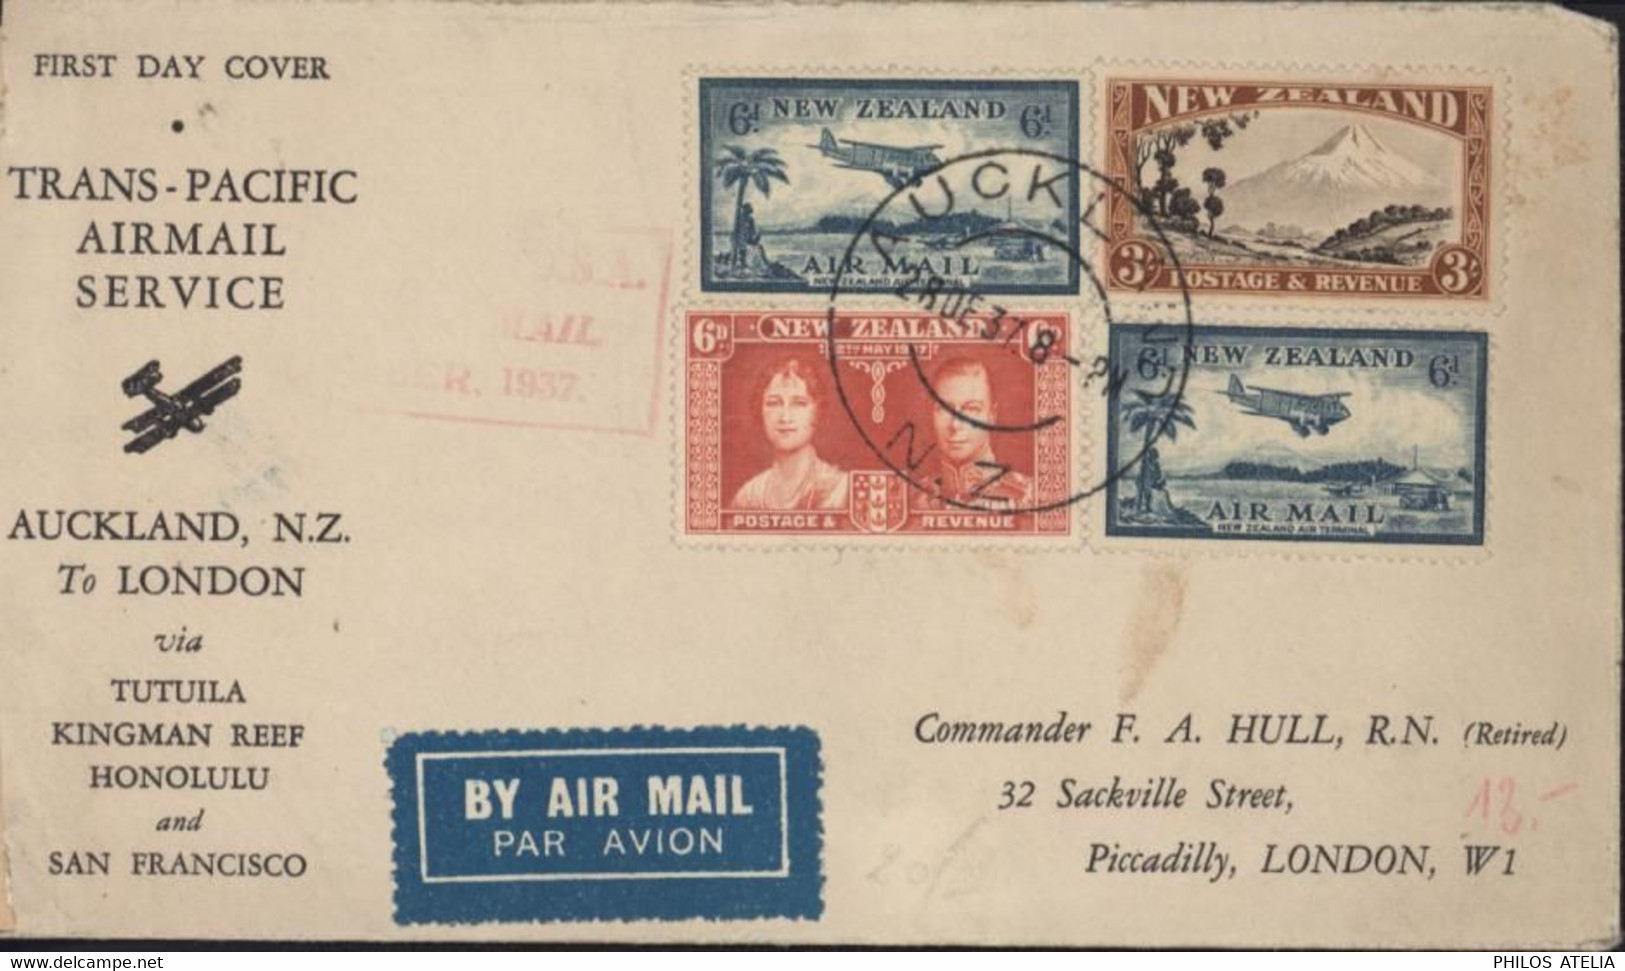 New Zealand By Air Mail FDC First Day Cover Trans Pacific Airmal Service Auckland To London CAD Auckland 28 DEC 37 - Luchtpost